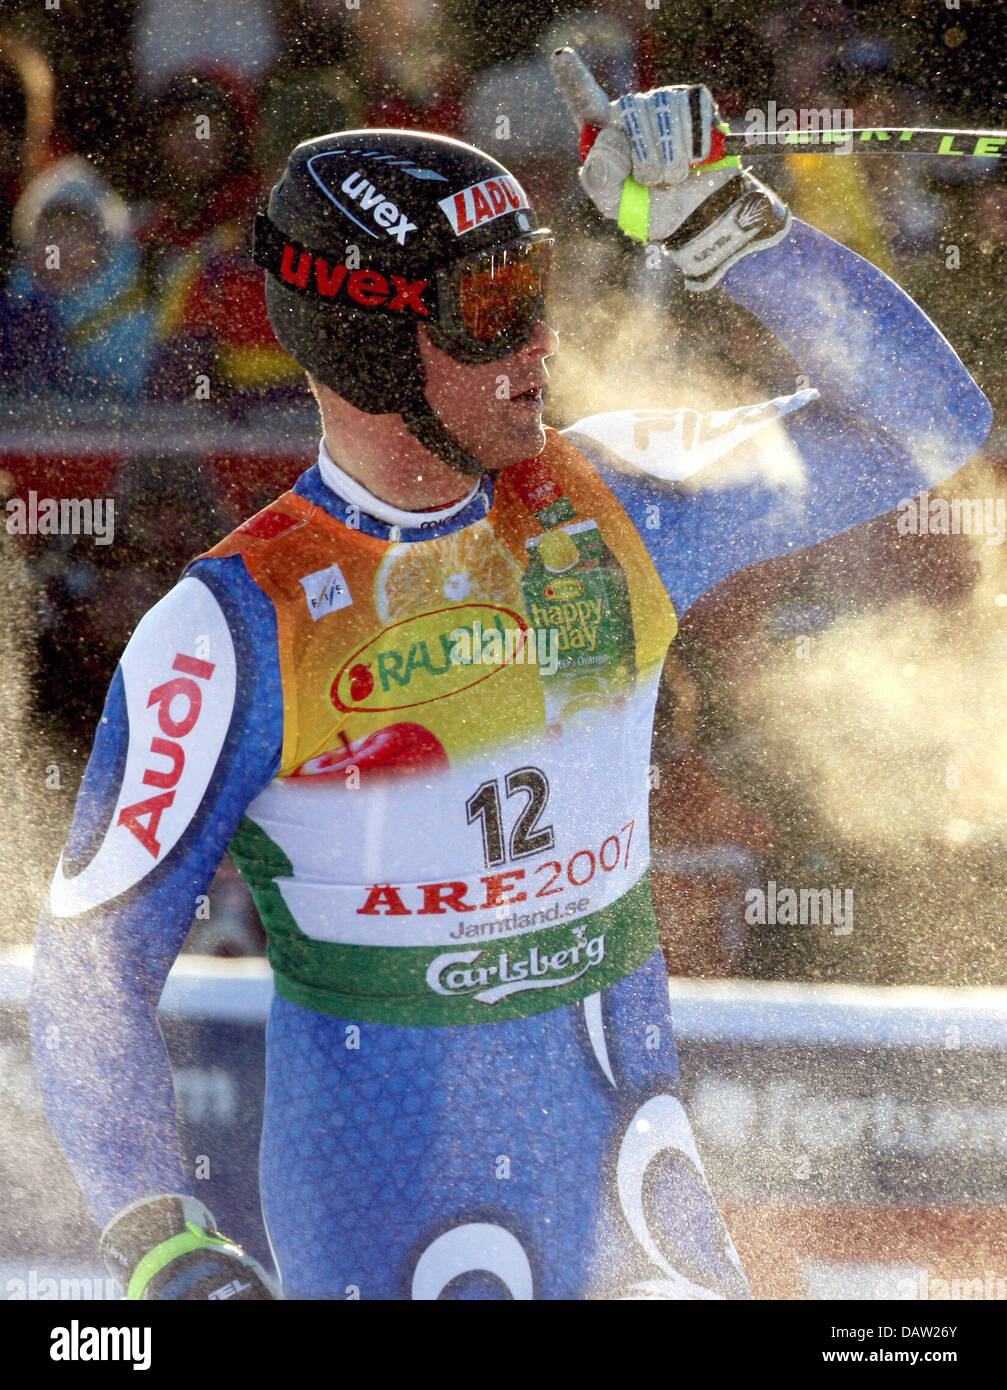 Italian Patrick Staudacher celebrates winning the Men's Super G of the Alpine Skiing World Championships Aare, Sweden, Tuesday, 06 February 2007. Patrick Staudacher of Italy clinched the Super G title, Fritz Strobl of Austria was second, Bruno Kernen of Switzerland was third. EPA/STEPHAN JANSEN Stock Photo